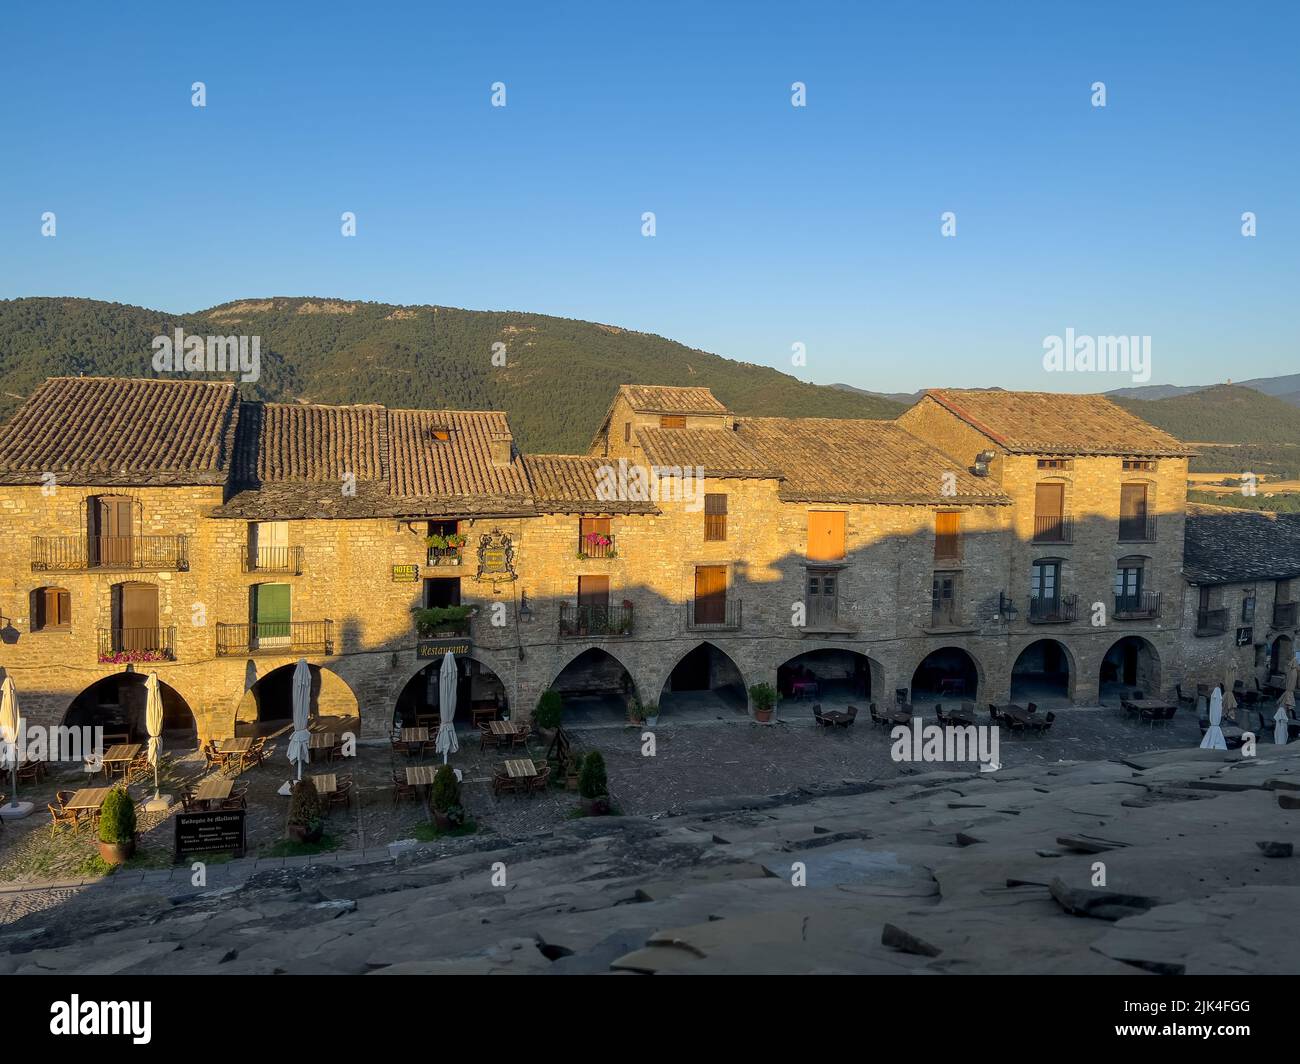 looking down in to the restored medieval square of Plaza Mayor, town of Ainsa Spain Stock Photo